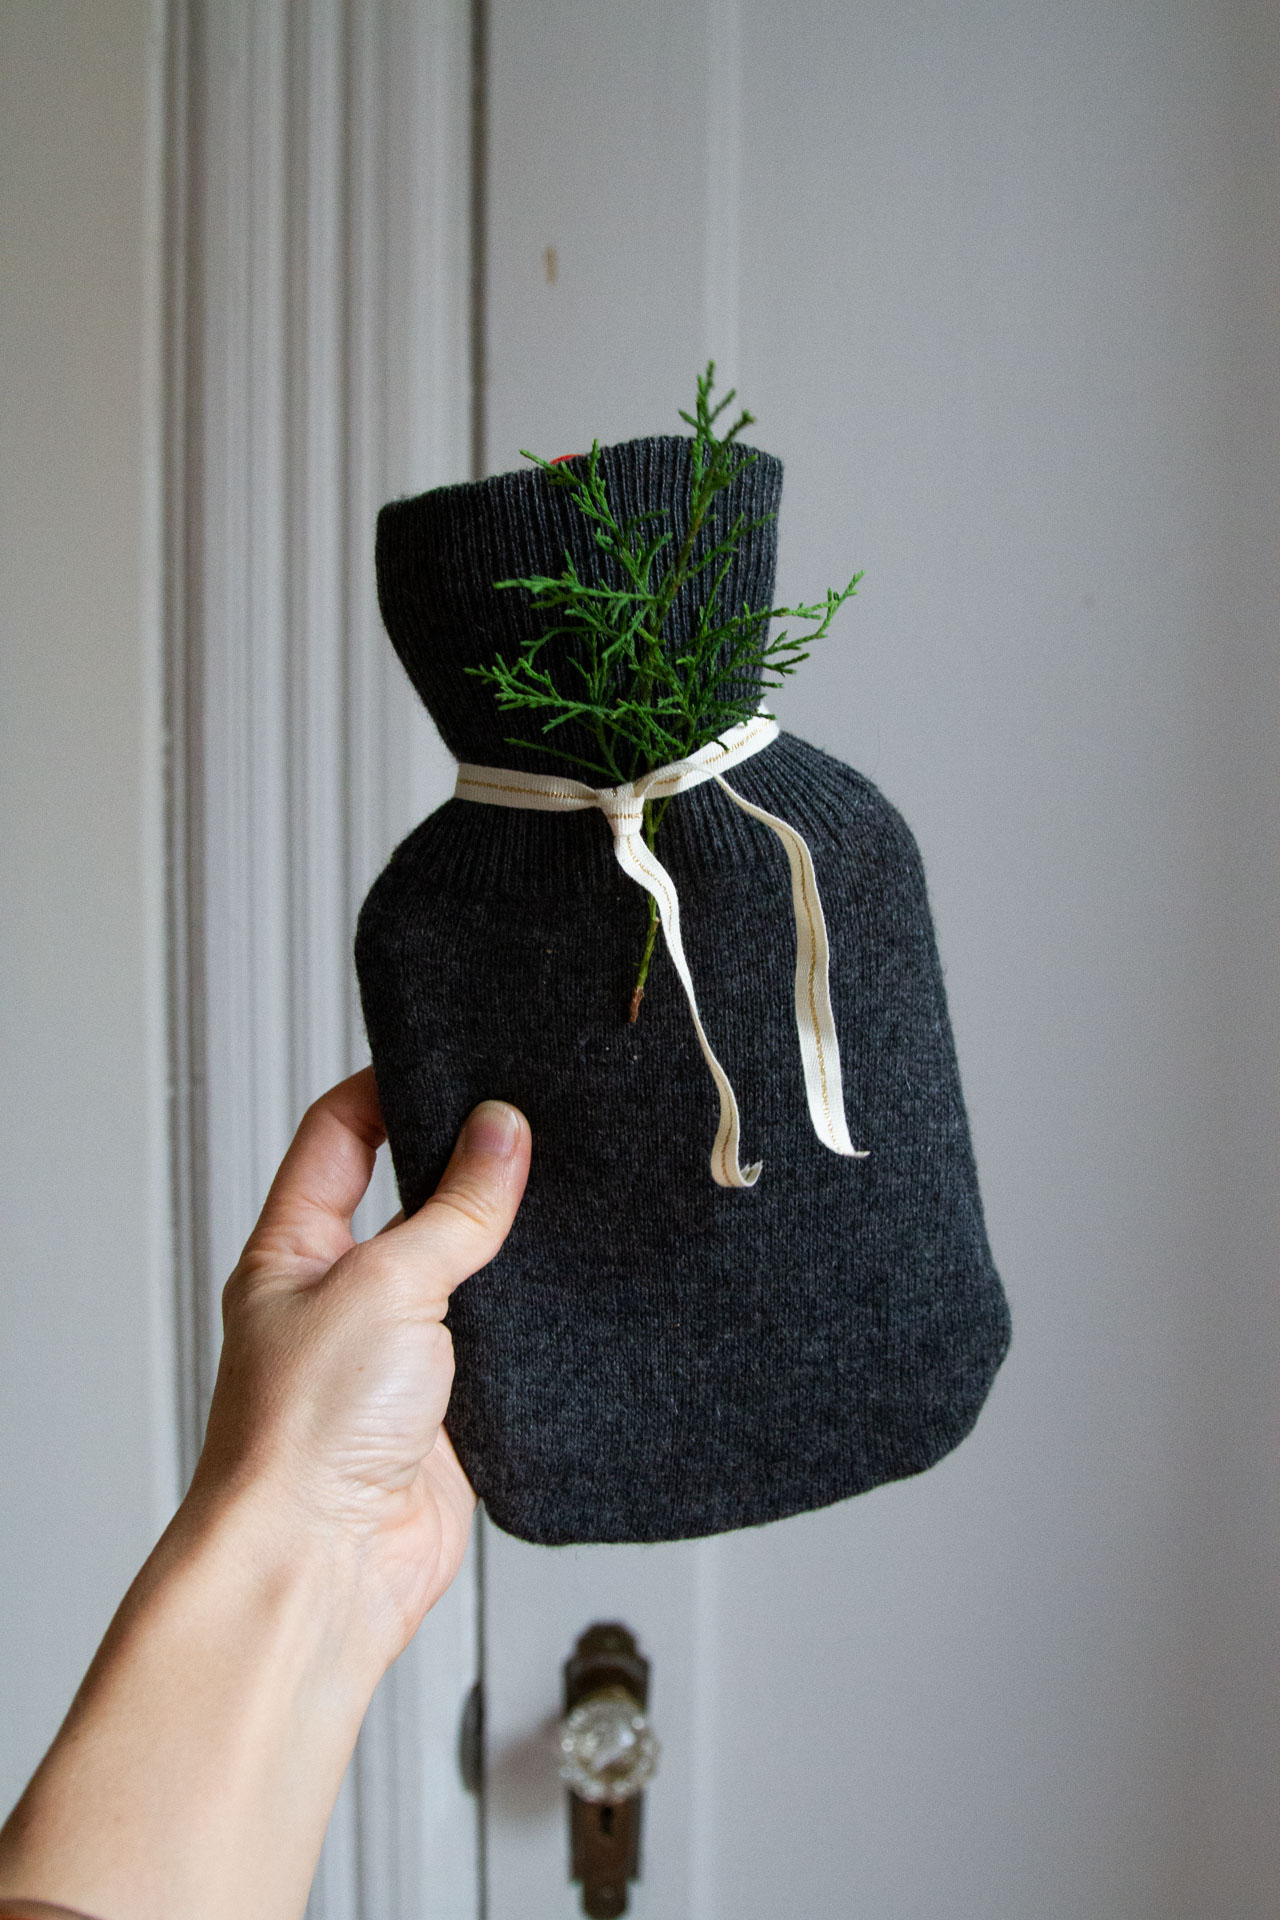 make your own: hot water bottle cover. – Reading My Tea Leaves